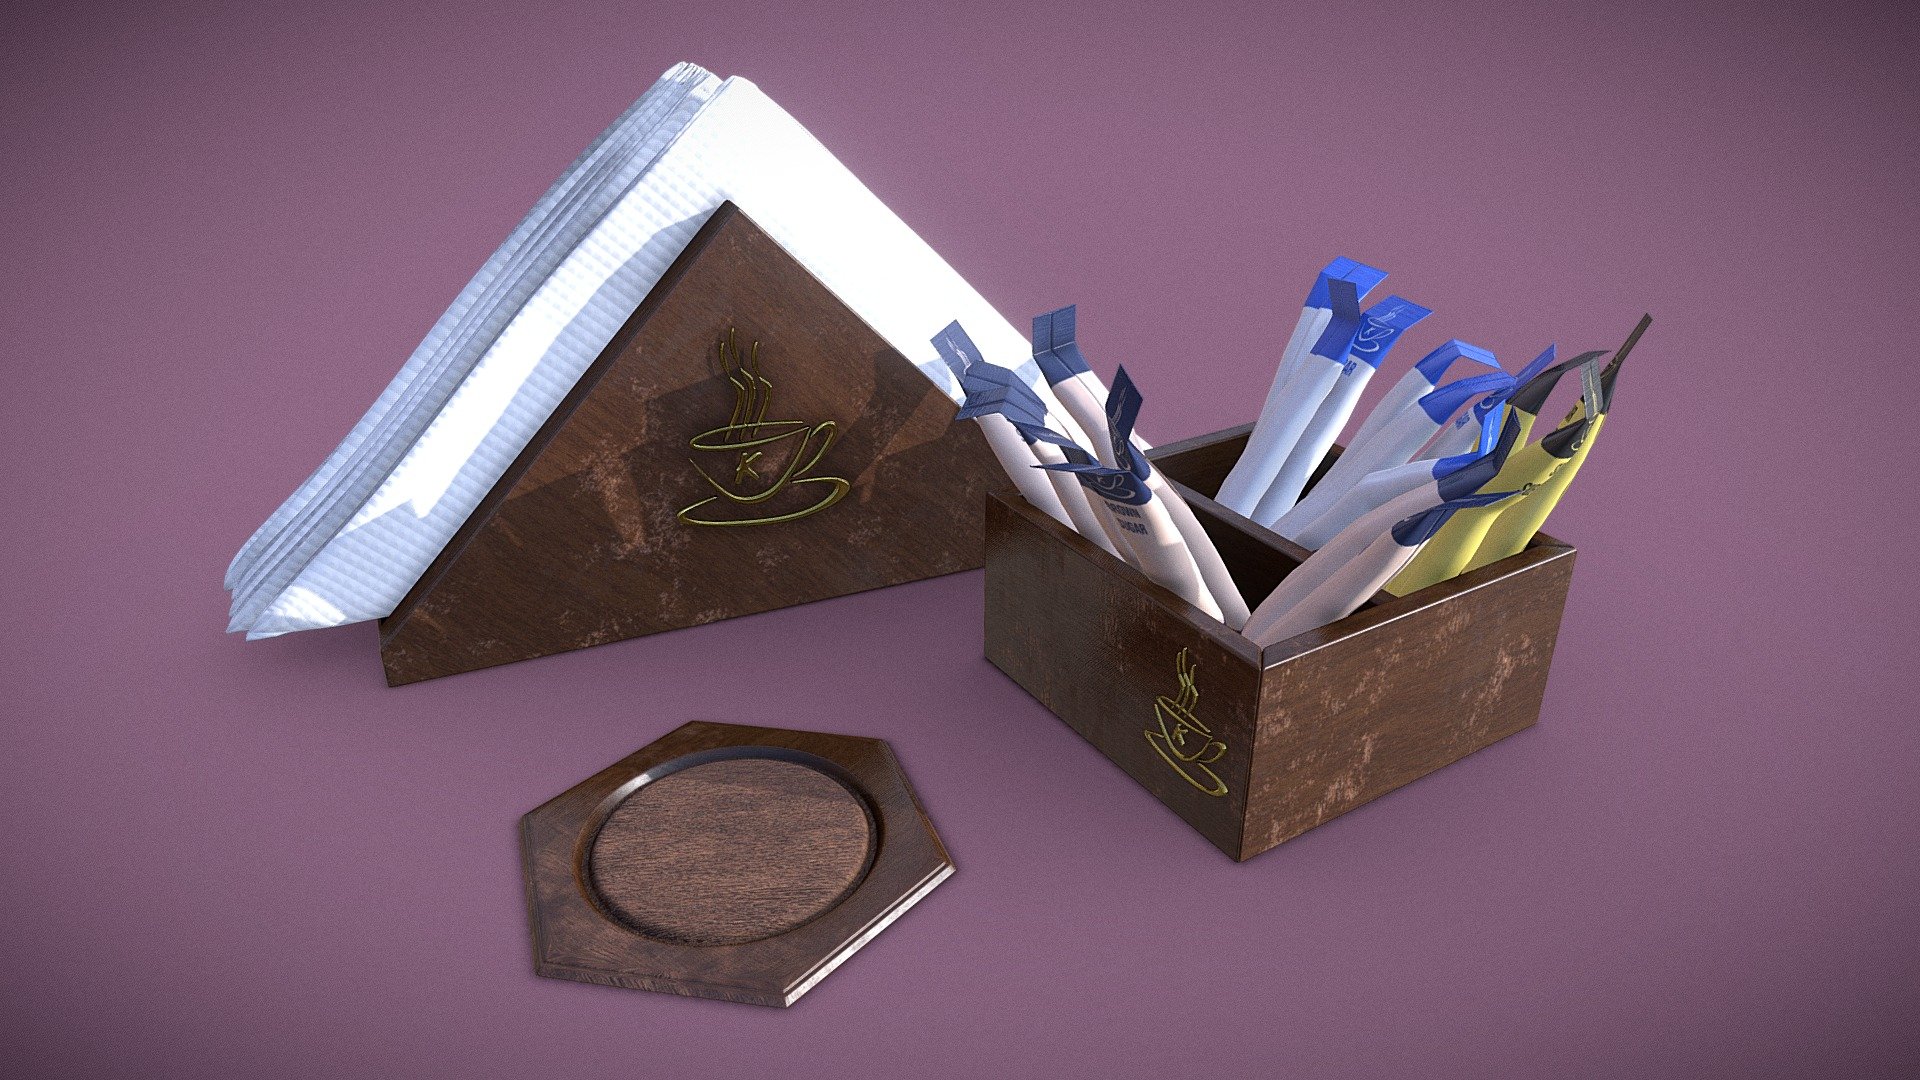 A collection of coffee shop tableware

Model Contents:




x 1 sugar caddy

x 1 sugar packs

x 1 brown sugar packs

x 1 sugar substitute packs

x 1 napkin holder

x 1 napkins

x 1 cup pad

Mesh:




Mesh Type: Triangulated Polygon Mesh

Tier: Highpoly

Model is Game-ready: NO

Model is Subdivision-ready: NO

Edge Split: Sharp edges only

Model is Scaled to Real World Scale: YES

Model is Rigged: NO

PolyCount:




Triangles: 191608

Vertices: 98861

Materials:




cafe_props_wood (4096 x 4096 Pixels)

cafe_props_napkins (4096 x 4096 Pixels)

Textures:




Texture File Format(s): .PNG

Texture Workflow(s): PBR Metallic Roughness

UV Mapping: Non-Overlapping (unique)

Texture Maps:




Ambient Occlusion

Base Color

Metallic

Normal GL

Roughness
 - Coffee Shop Props - Download Free 3D model by Blarb 3d model